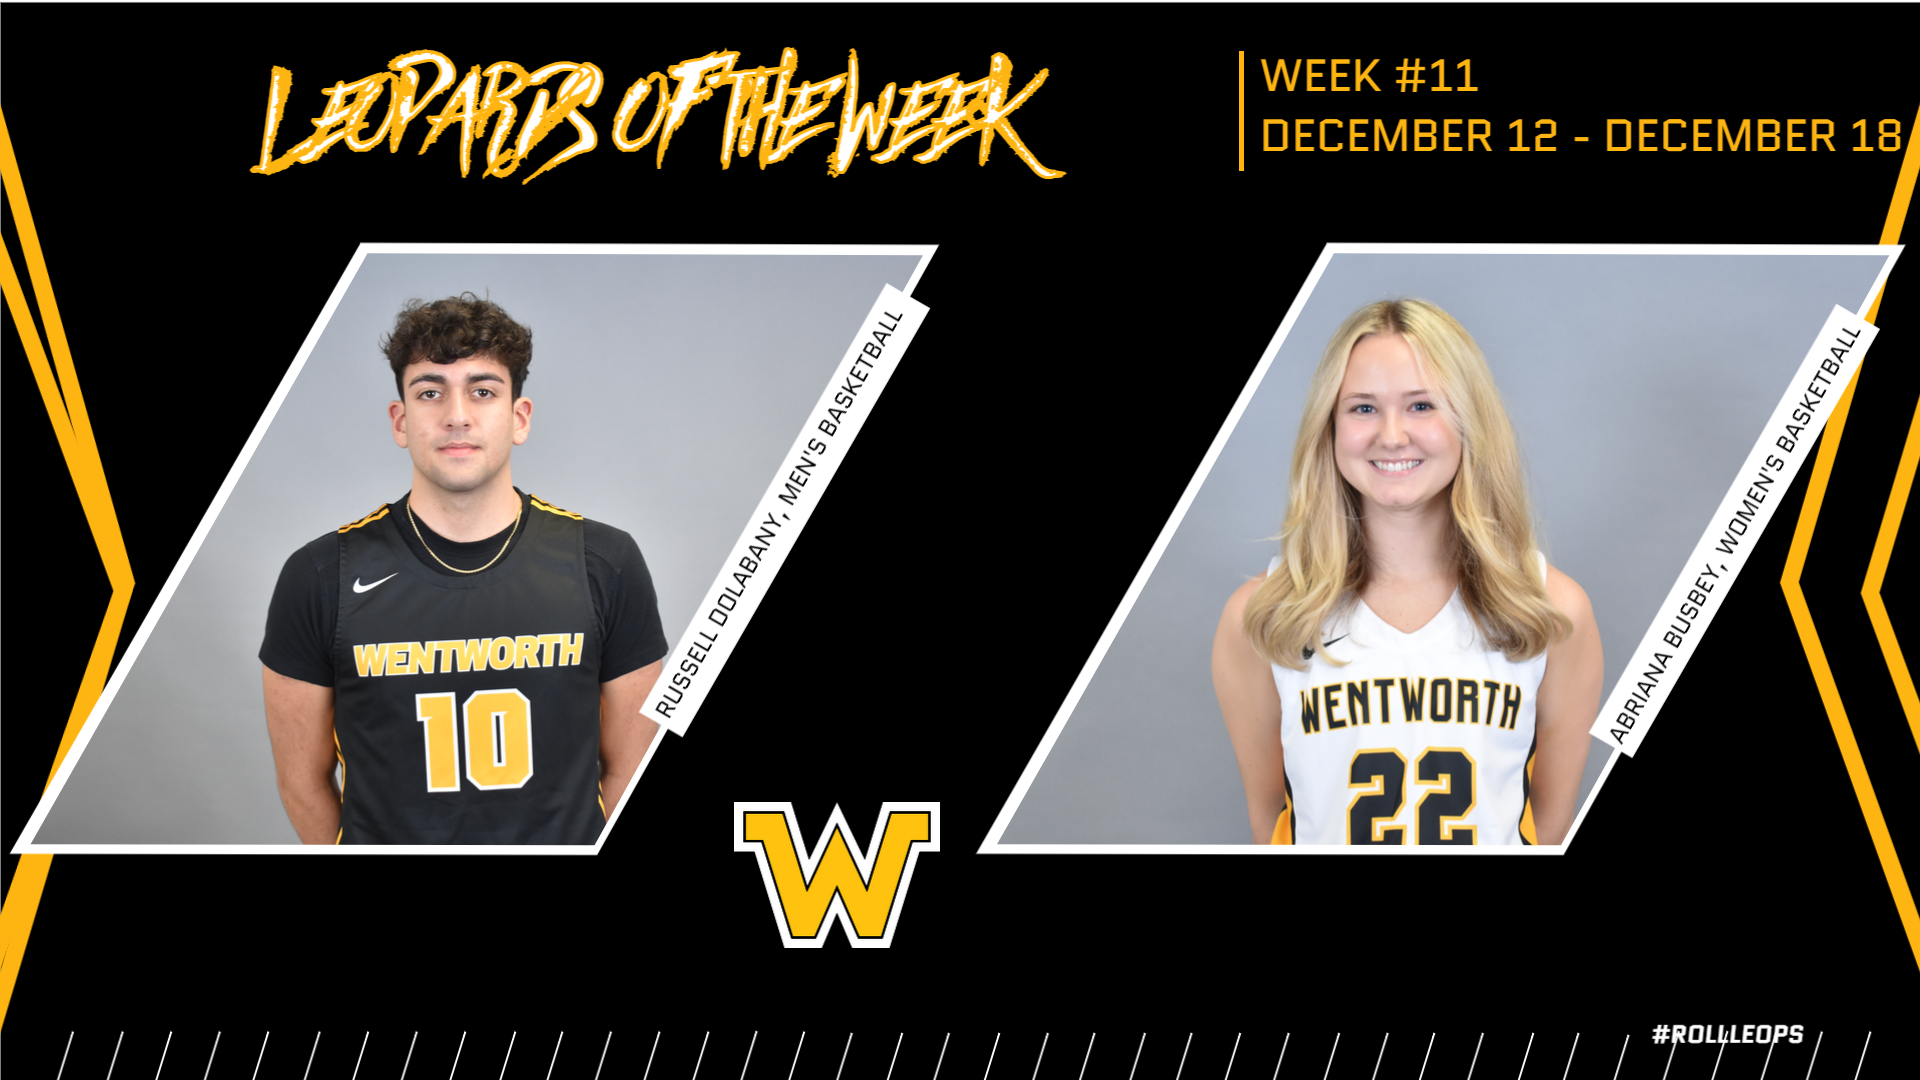 Dolabany, Busbey Named Leopards of the Week